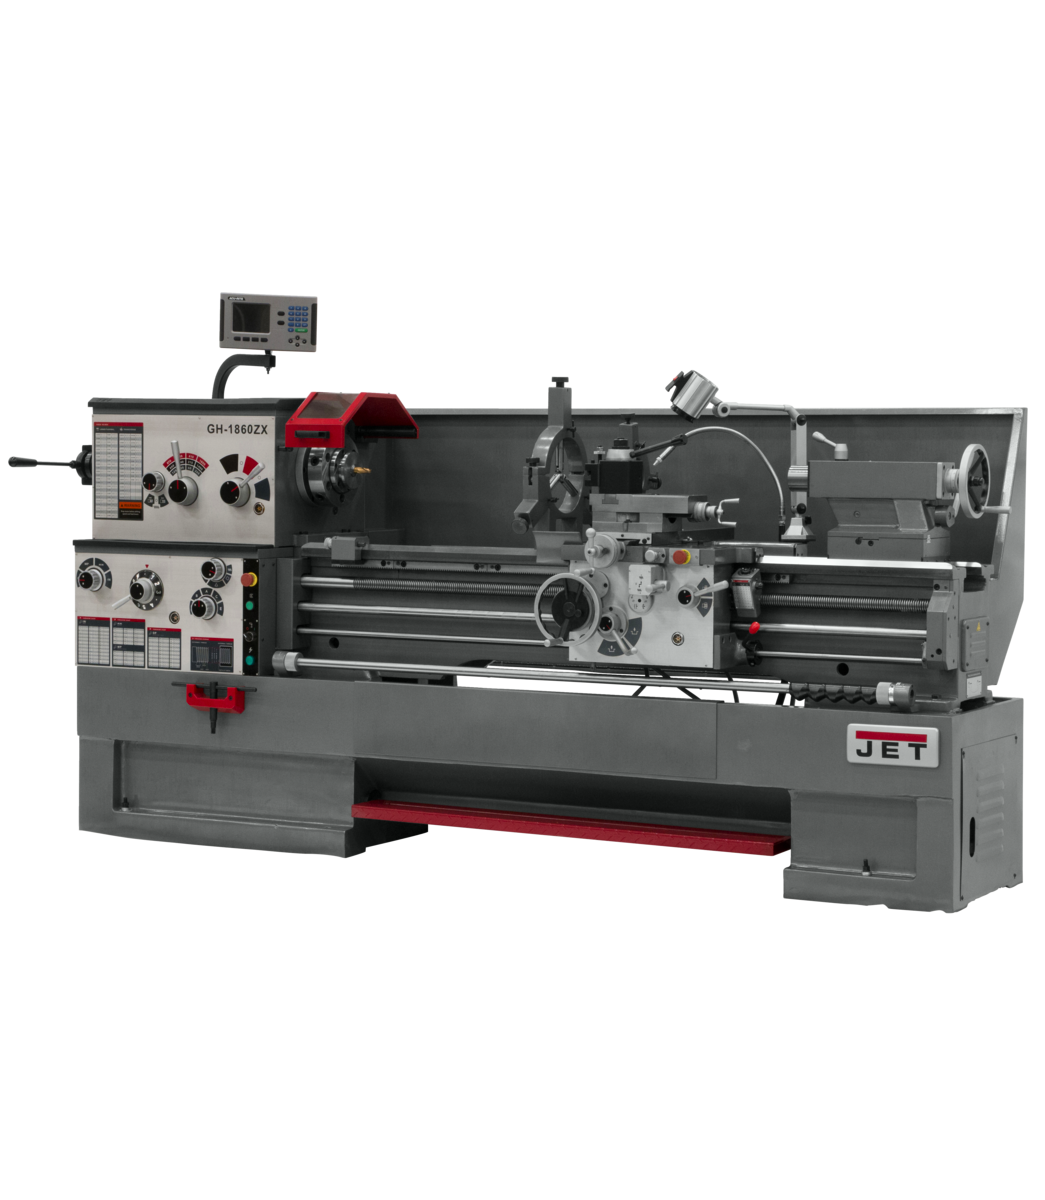 321491, GH-1860ZX Lathe with 2-axis ACU-RITE 203 DRO, and Collet Closer Installed, Jet, Metalworking, Turning, Lathes